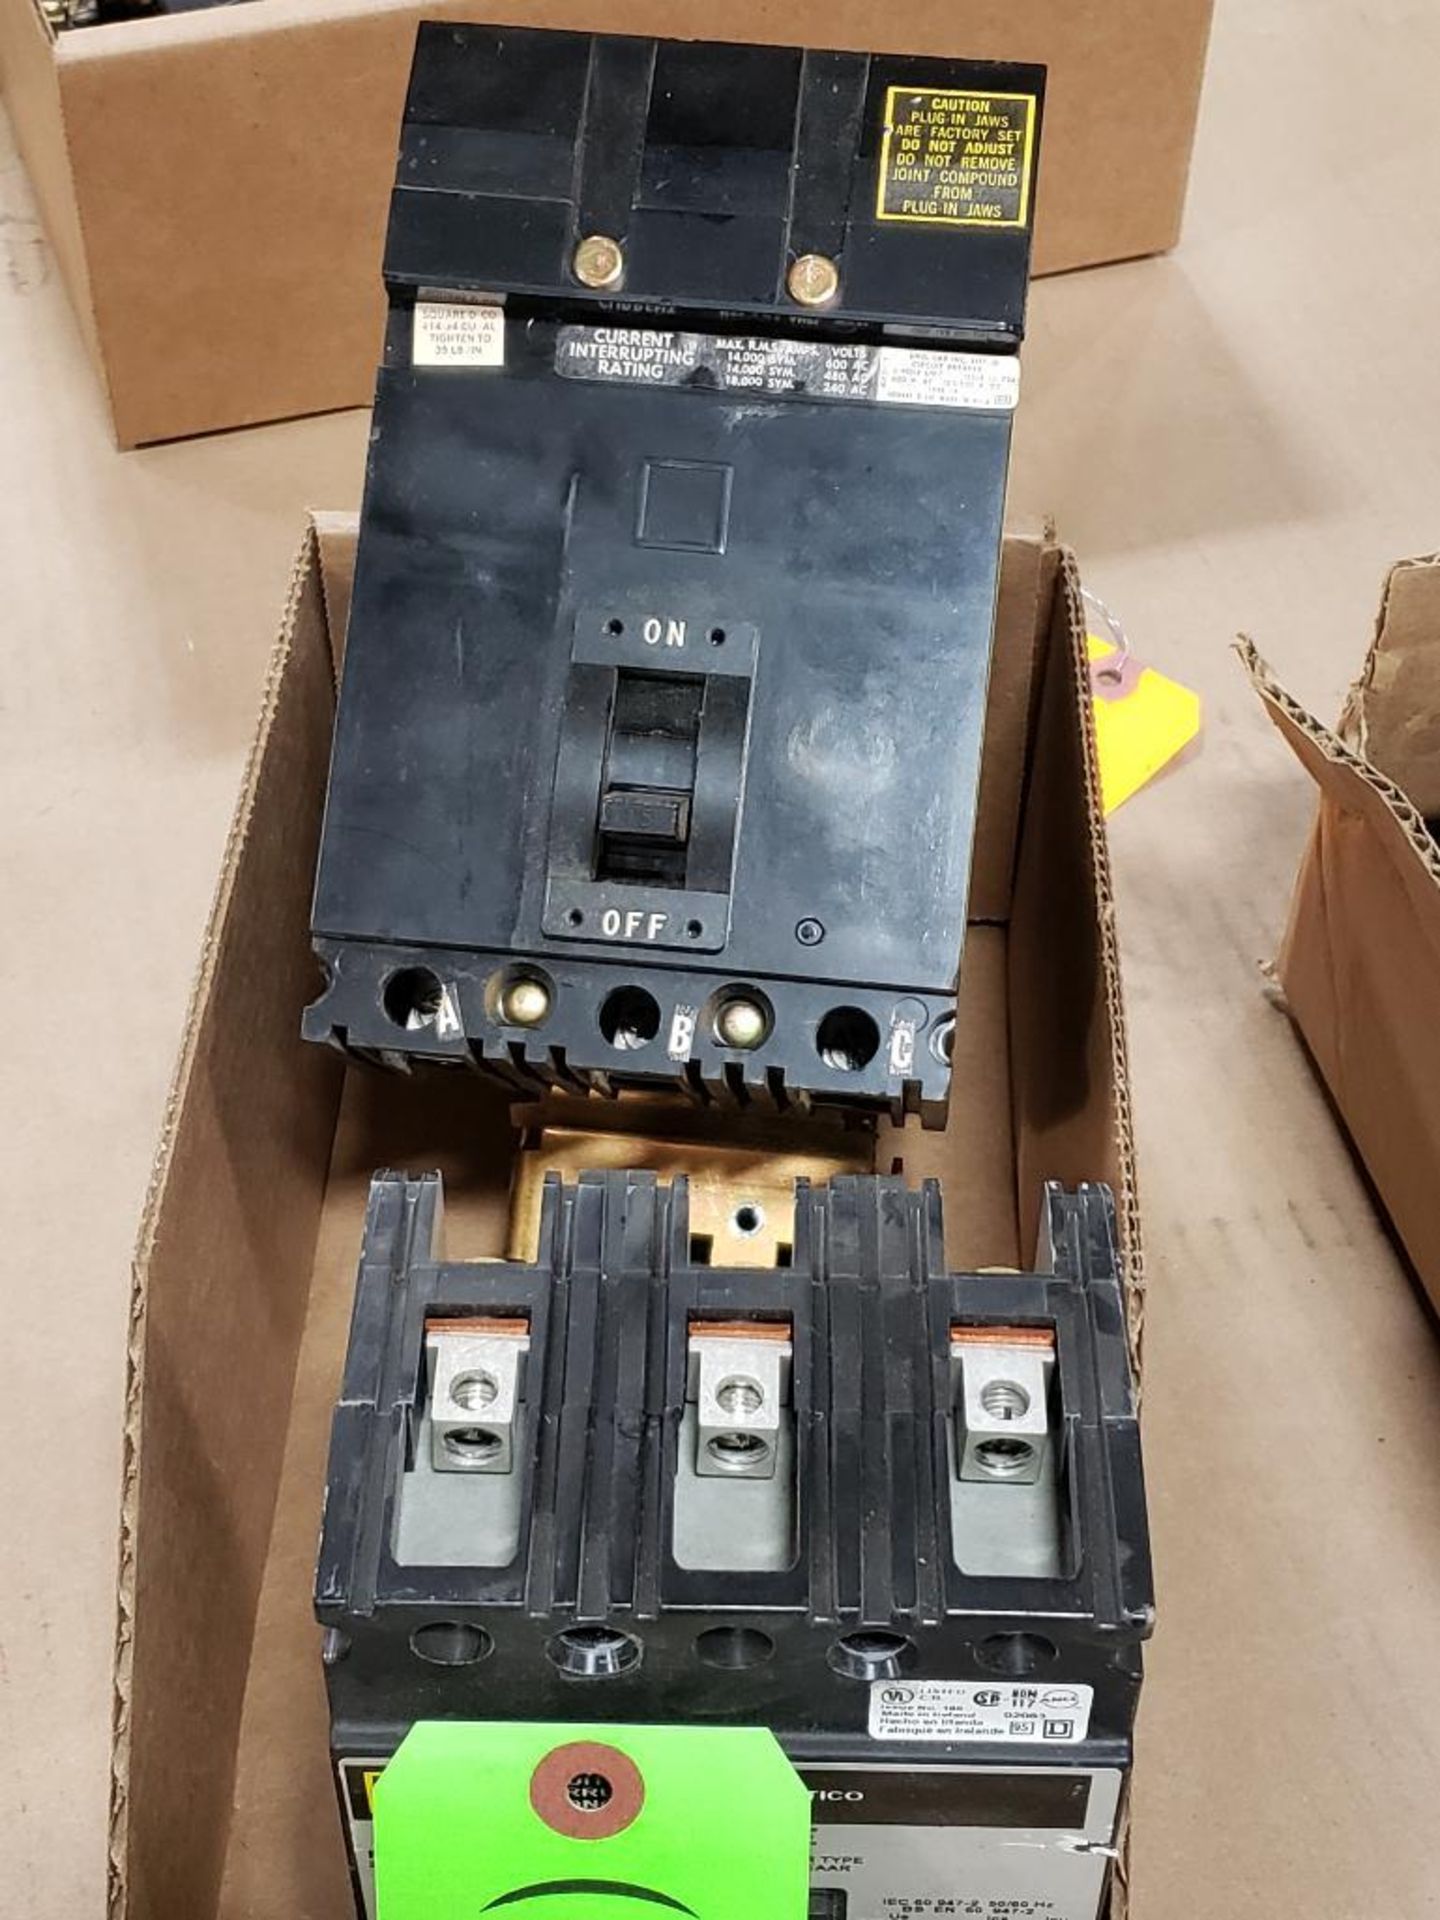 Qty 2 - molded case breakers. Square-D.